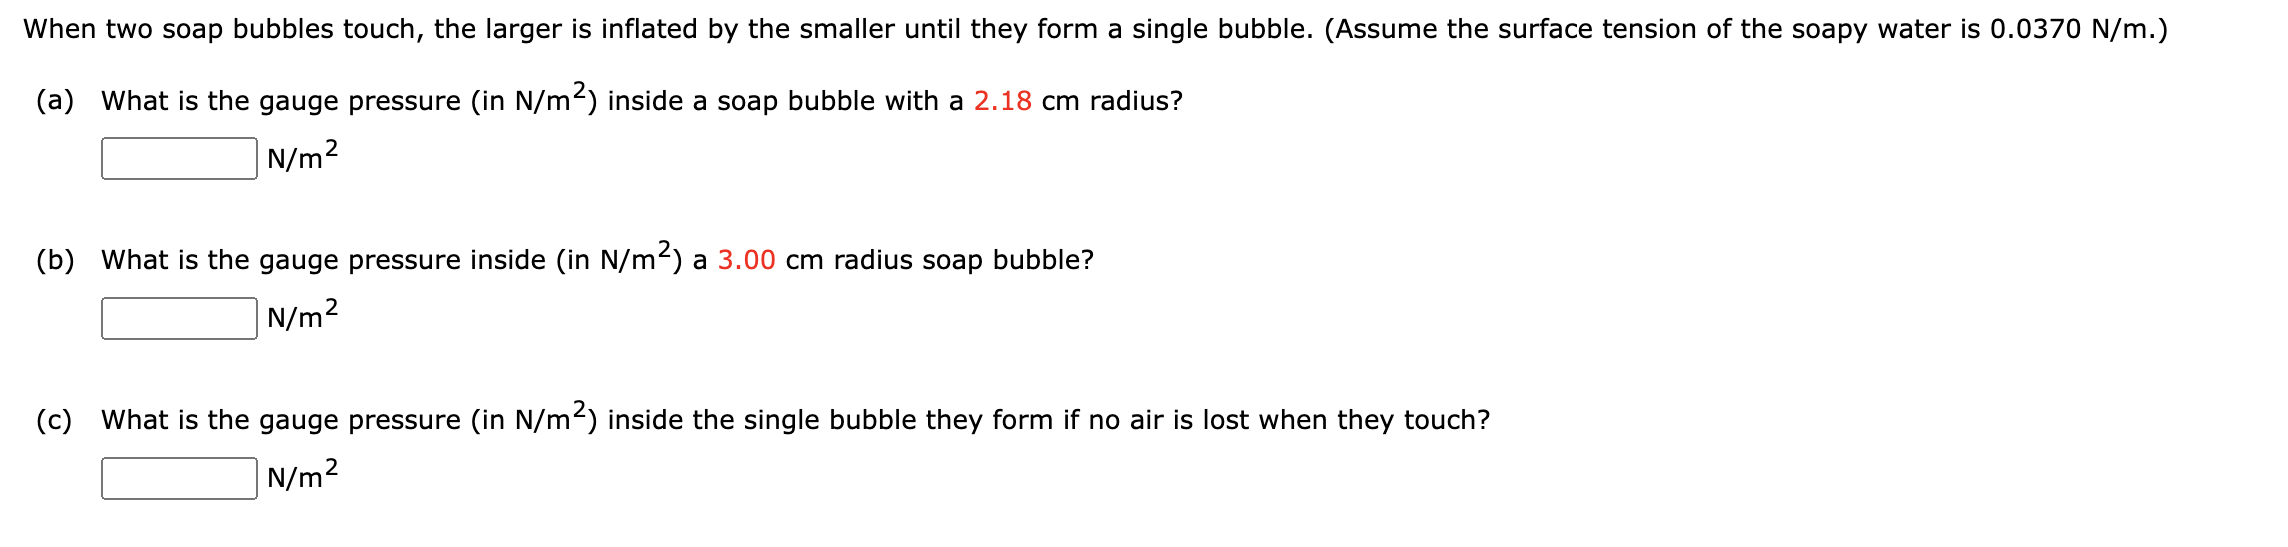 When two soap bubbles touch, the larger is inflated by the smaller until they form a single bubble. (Assume the surface tensi